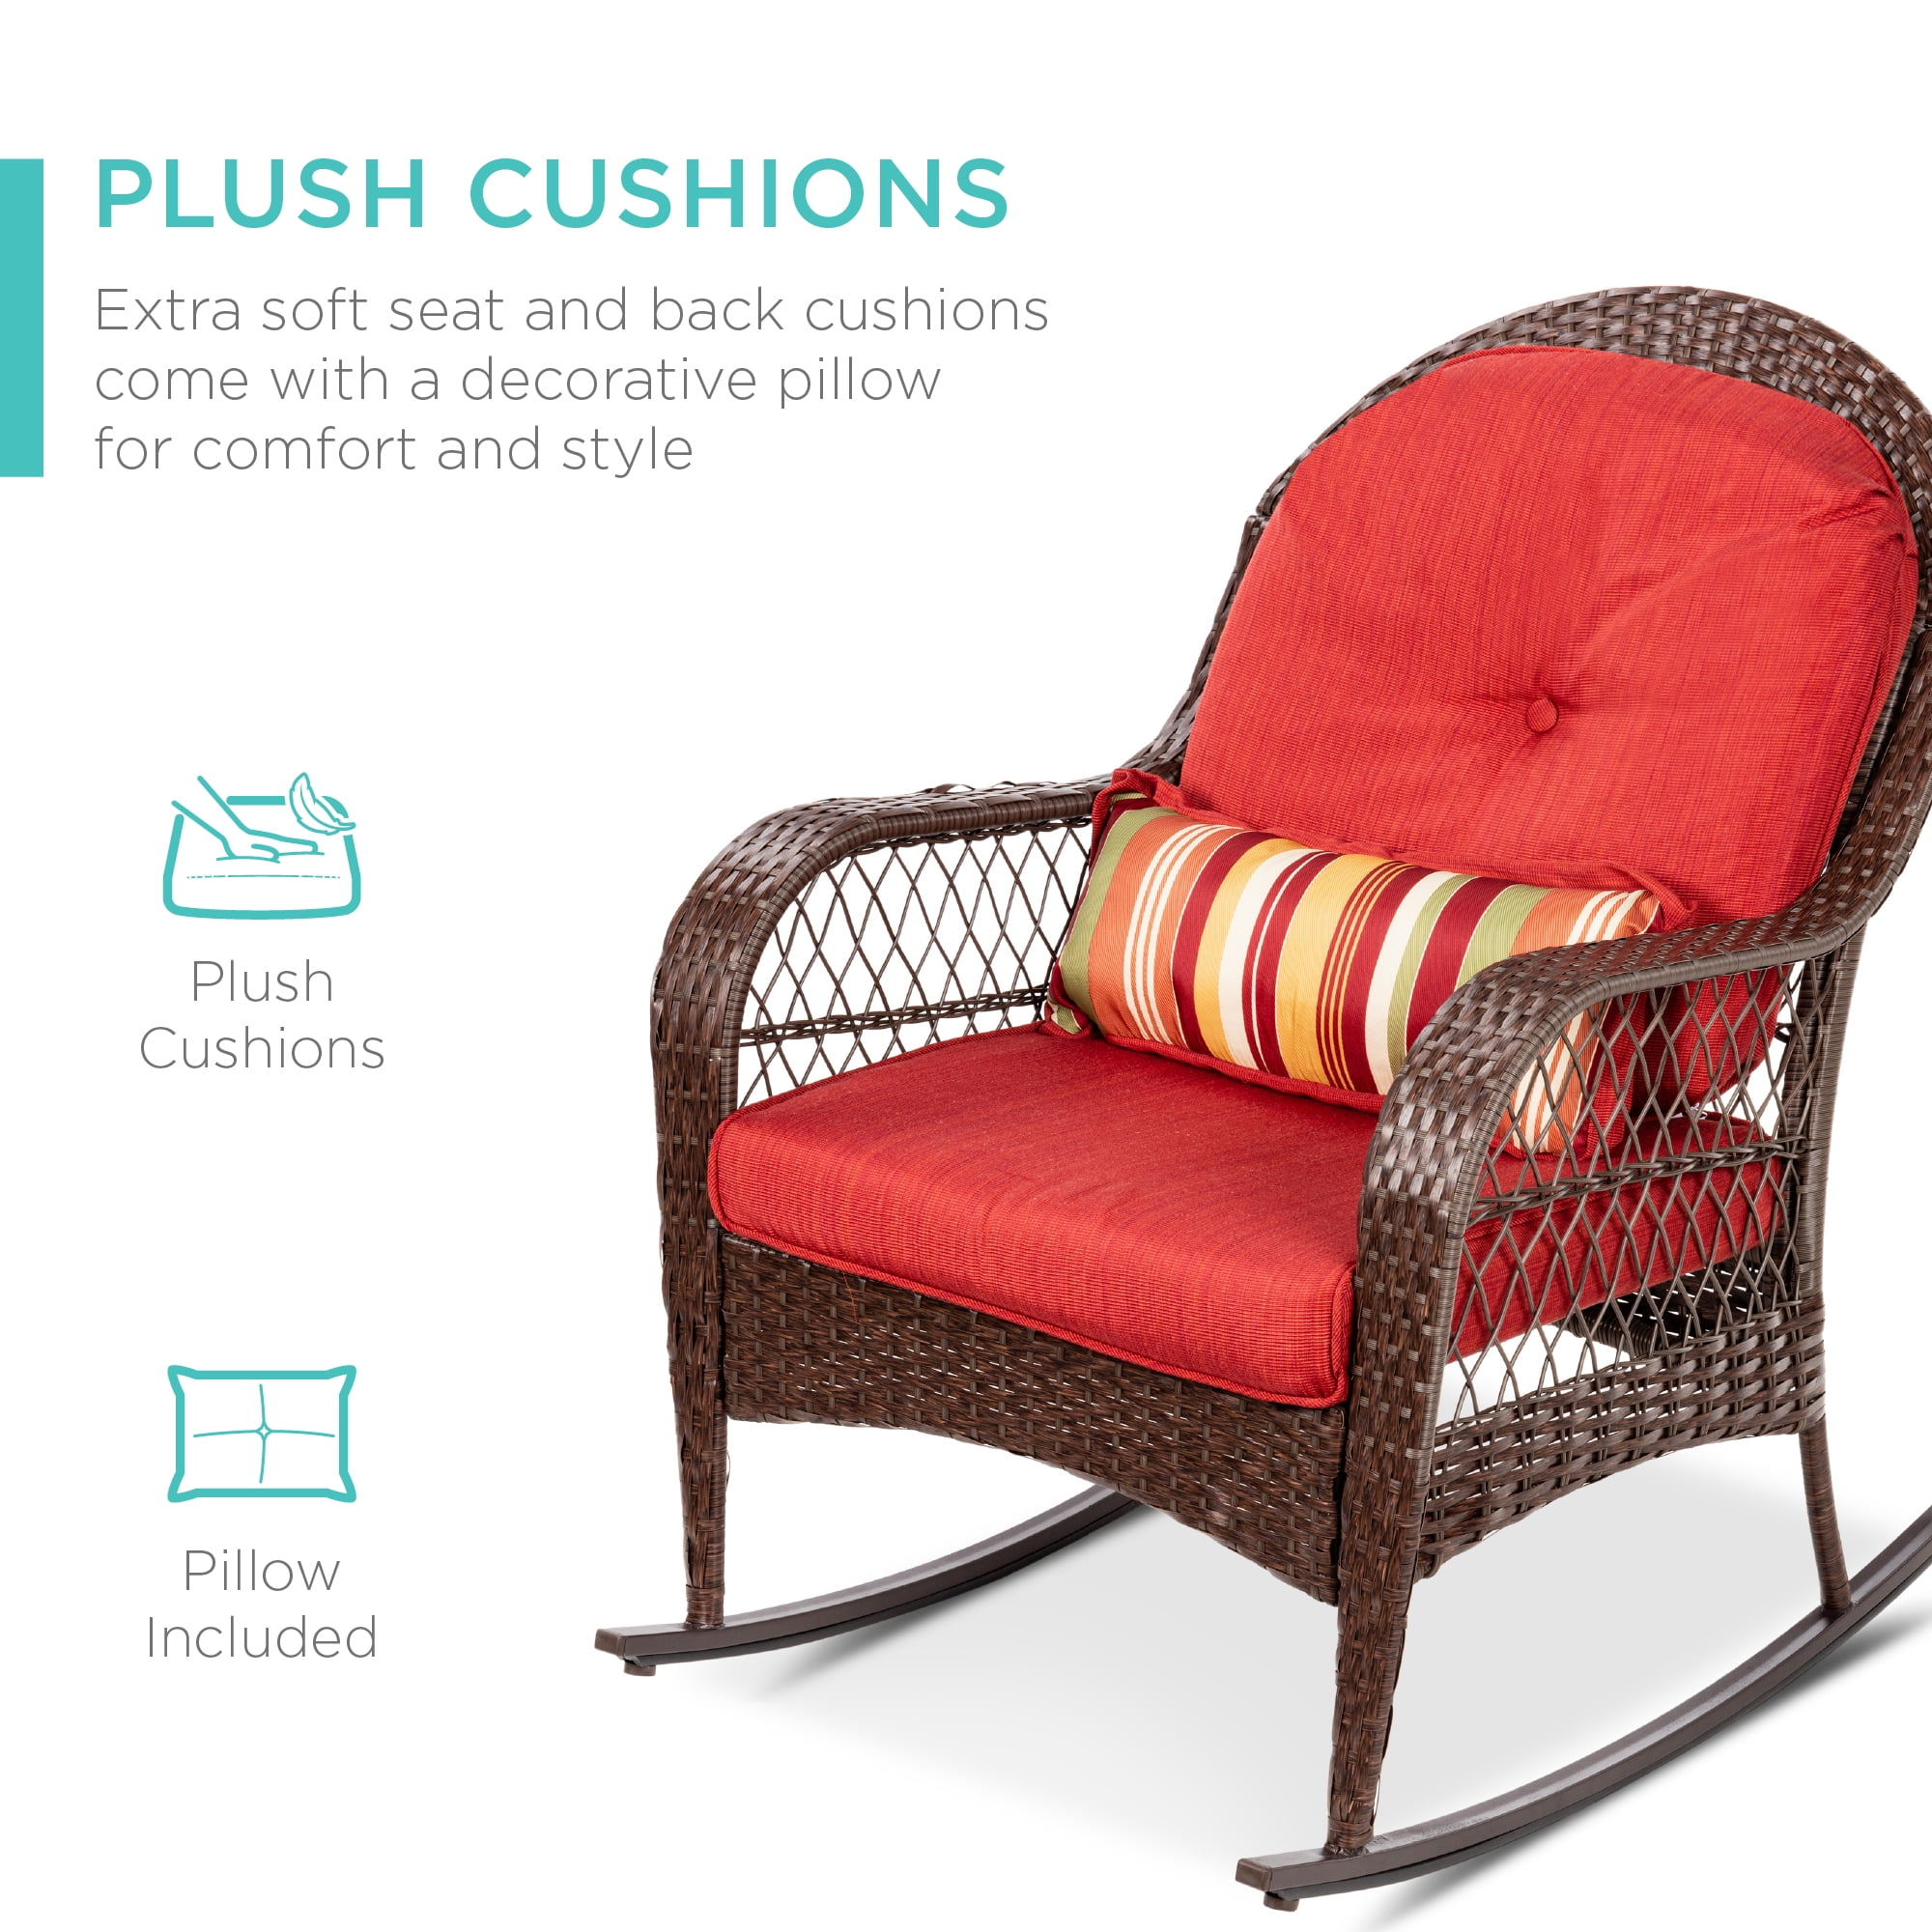 Patio Chairs Yard Garden Outdoor, Cushions For Outdoor Wicker Rocking Chairs